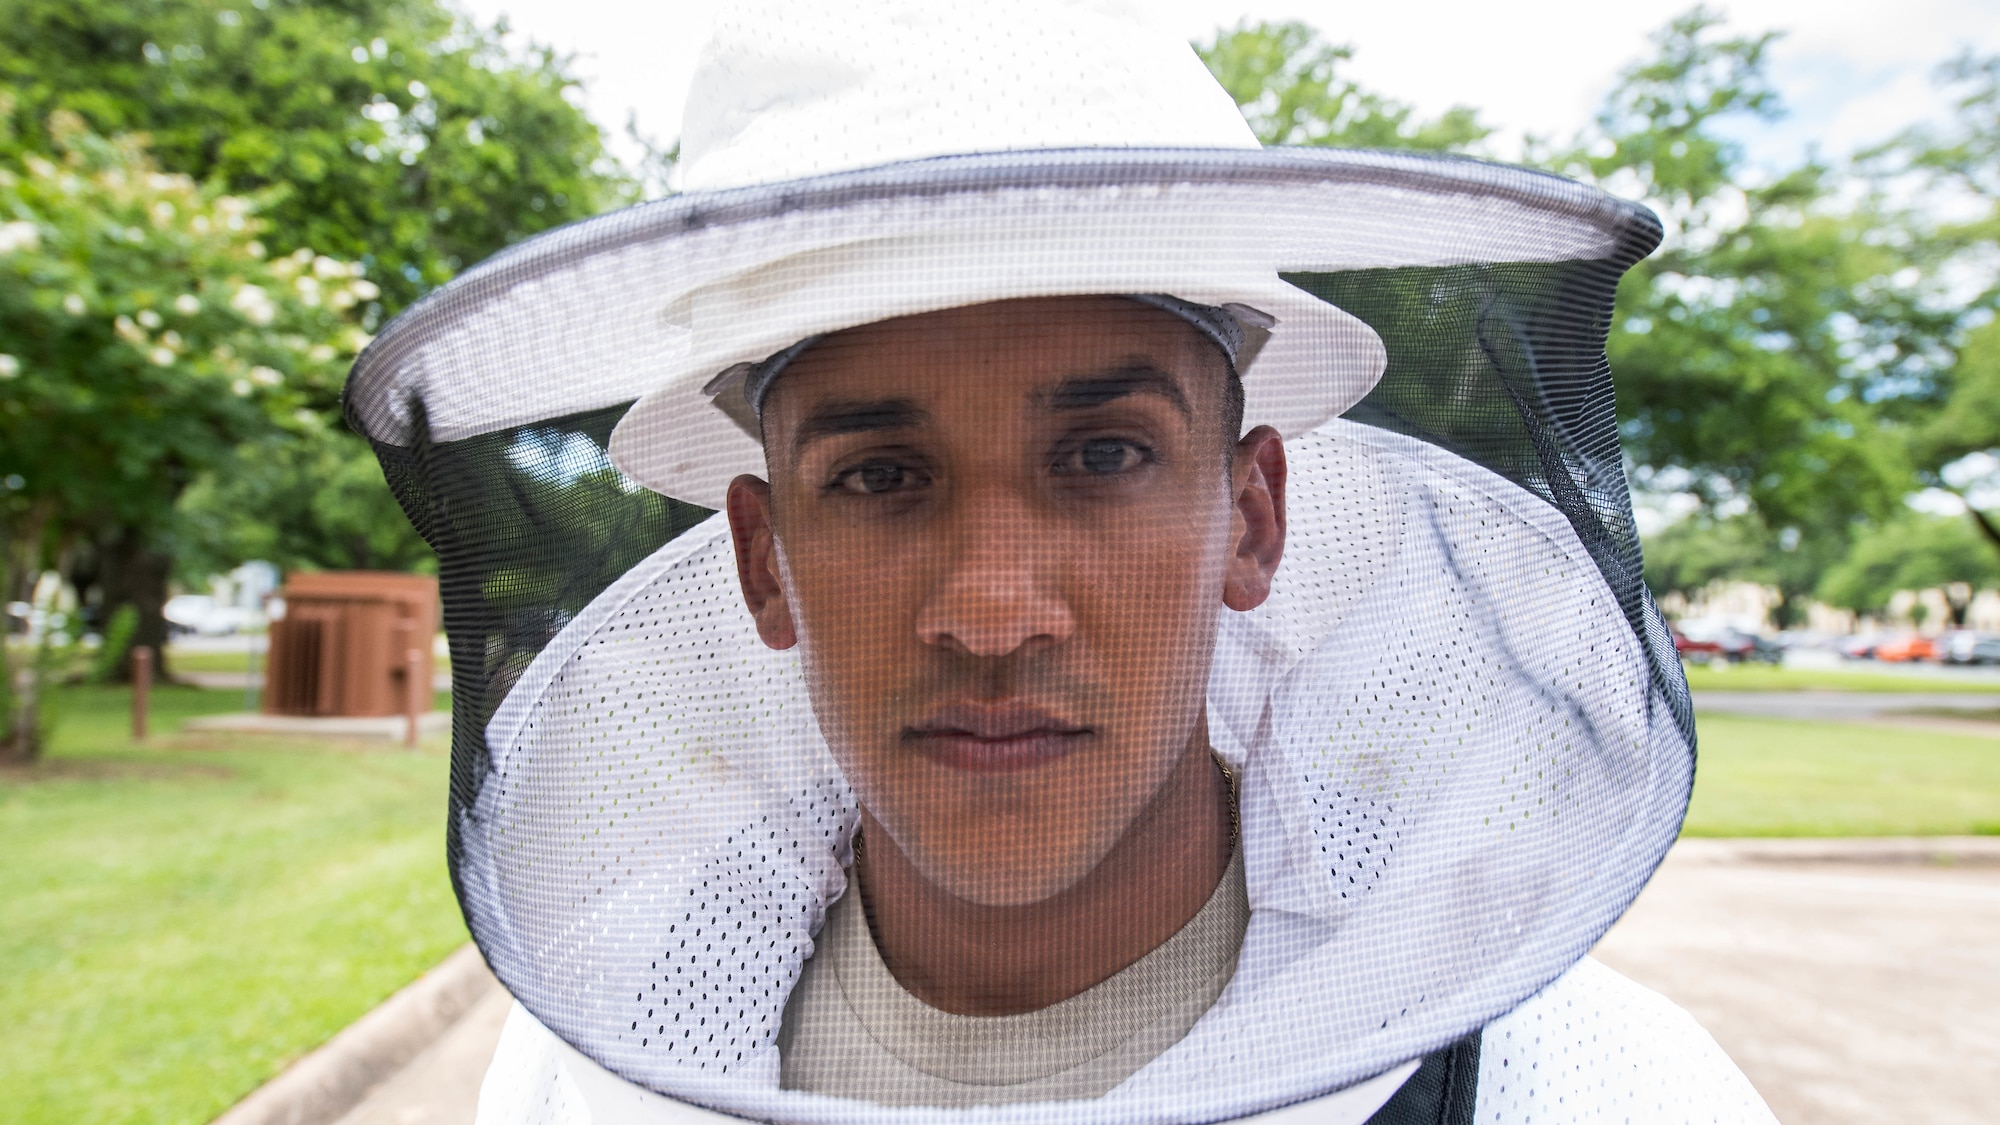 Airman 1st Class Alberto Montesino, a 2nd Civil Engineer Squadron pest management apprentice, wears a bee suit after dealing with a colony of bees at the 2nd Bomb Wing Headquarters Building at Barksdale Air Force Base, Louisiana, June 6, 2019.  The 2nd CES pest management shop relocates bees by capturing the queen bee and taking her to a new location where the rest of the colony will follow. (U.S. Air Force photo by Airman Jacob B. Wrightsman)